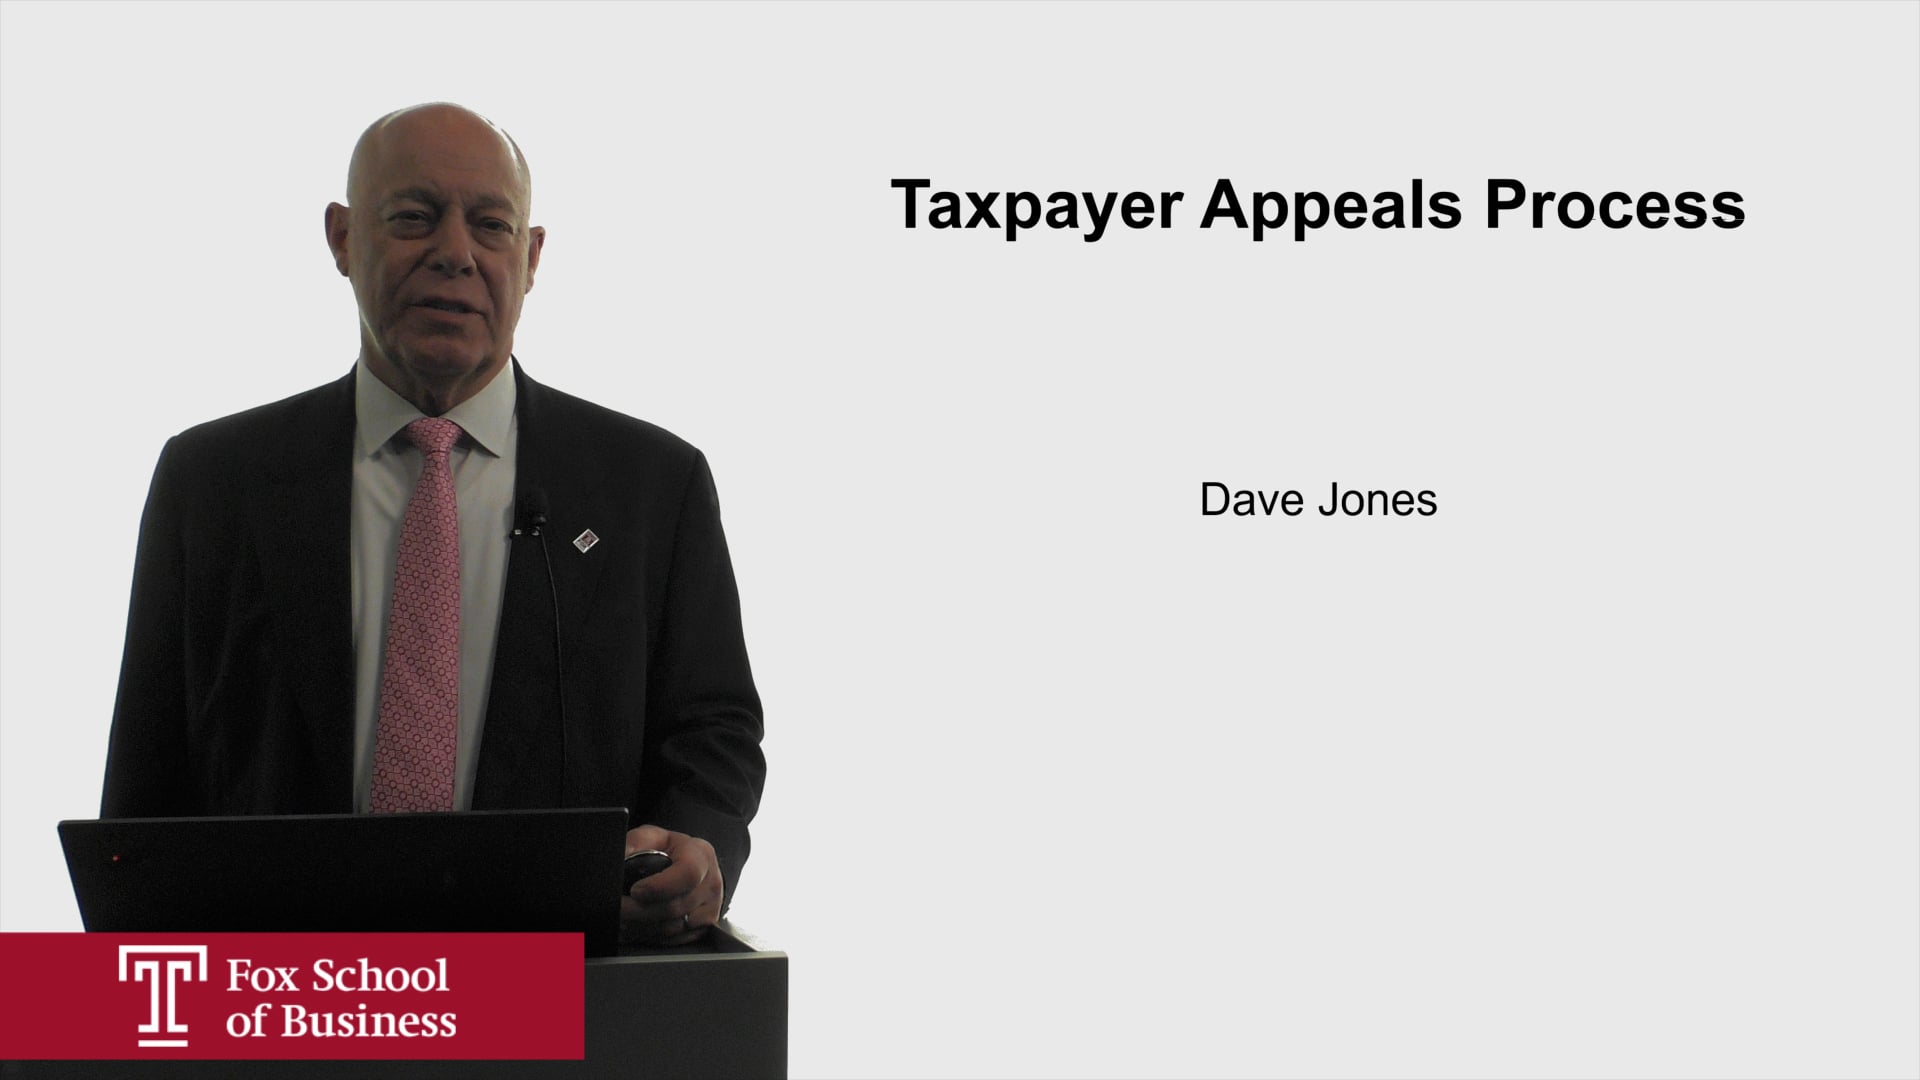 Taxpayer’s Appeals Process